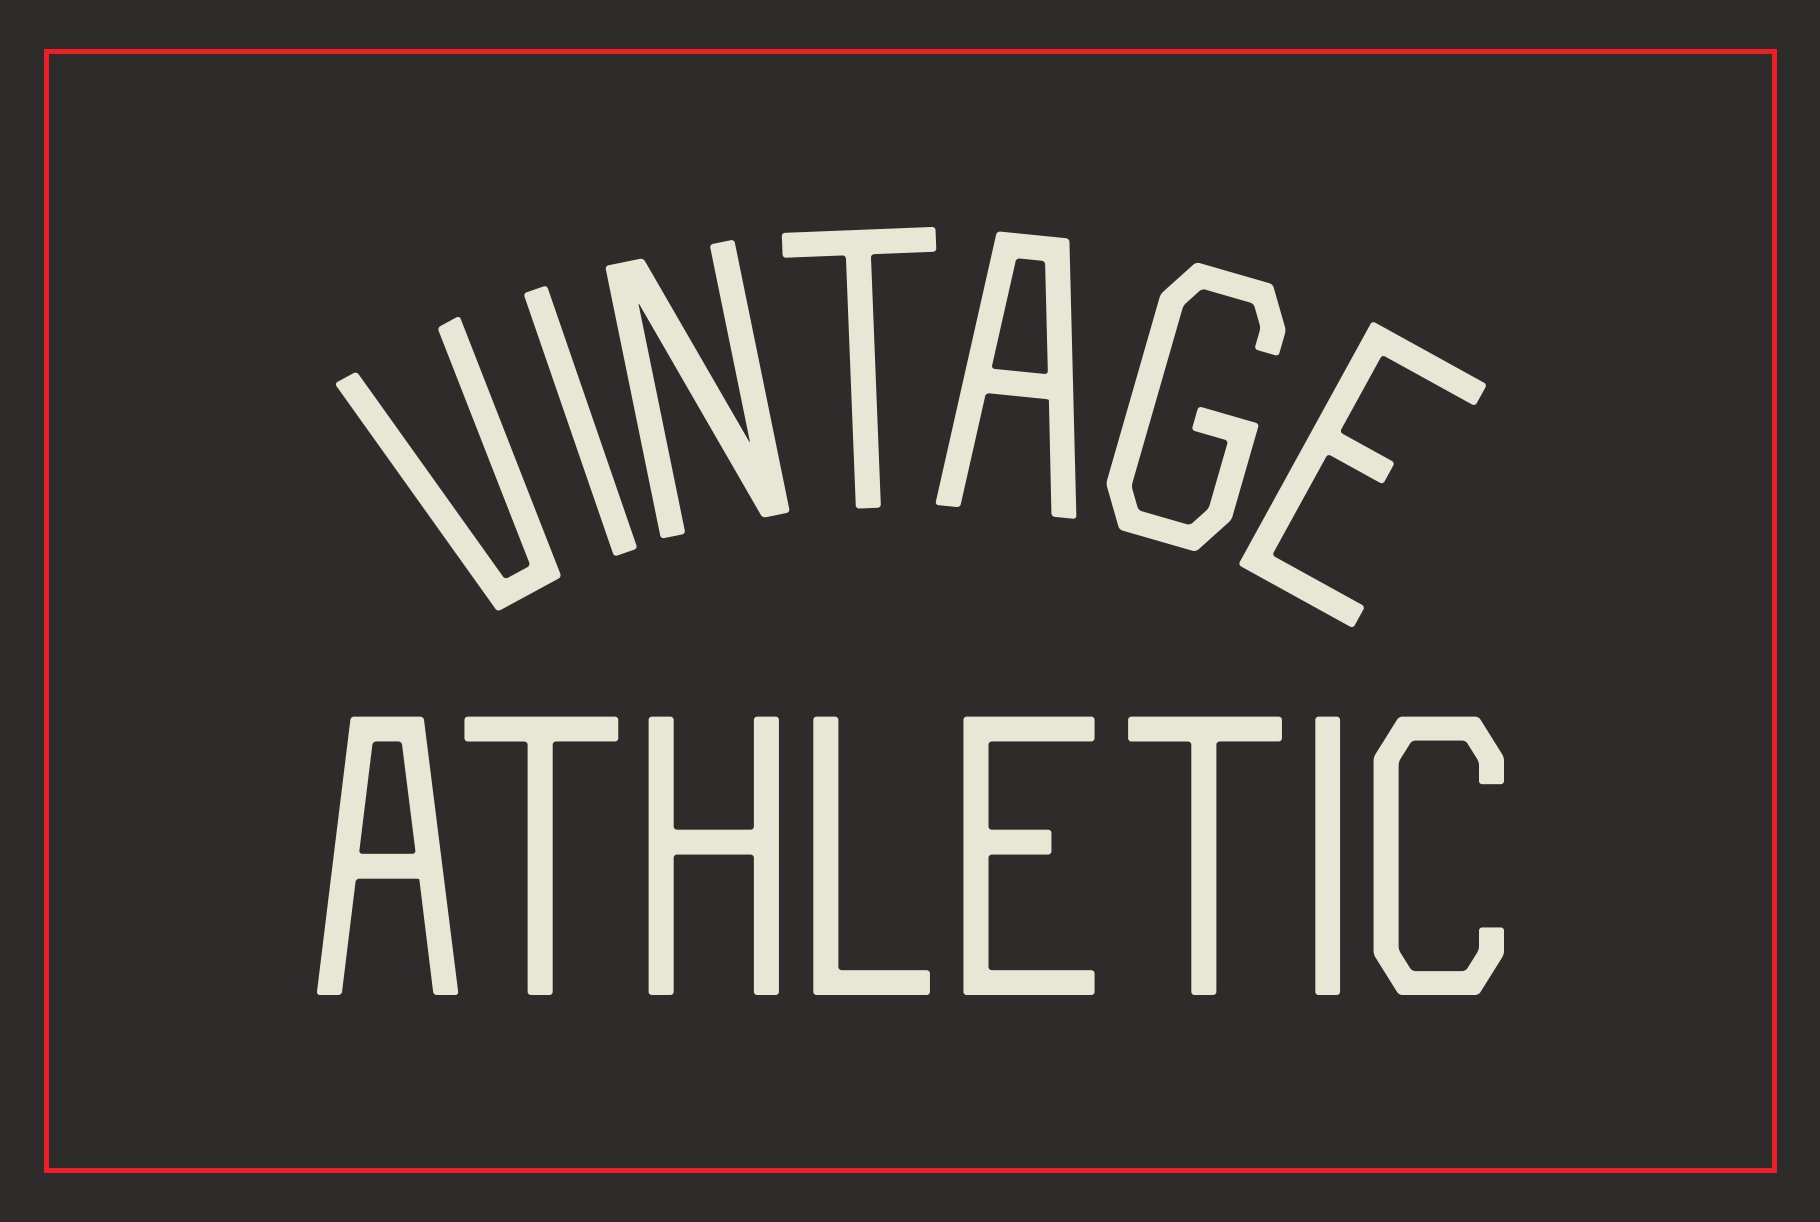 Vintage Athletic - Block Typeface cover image.